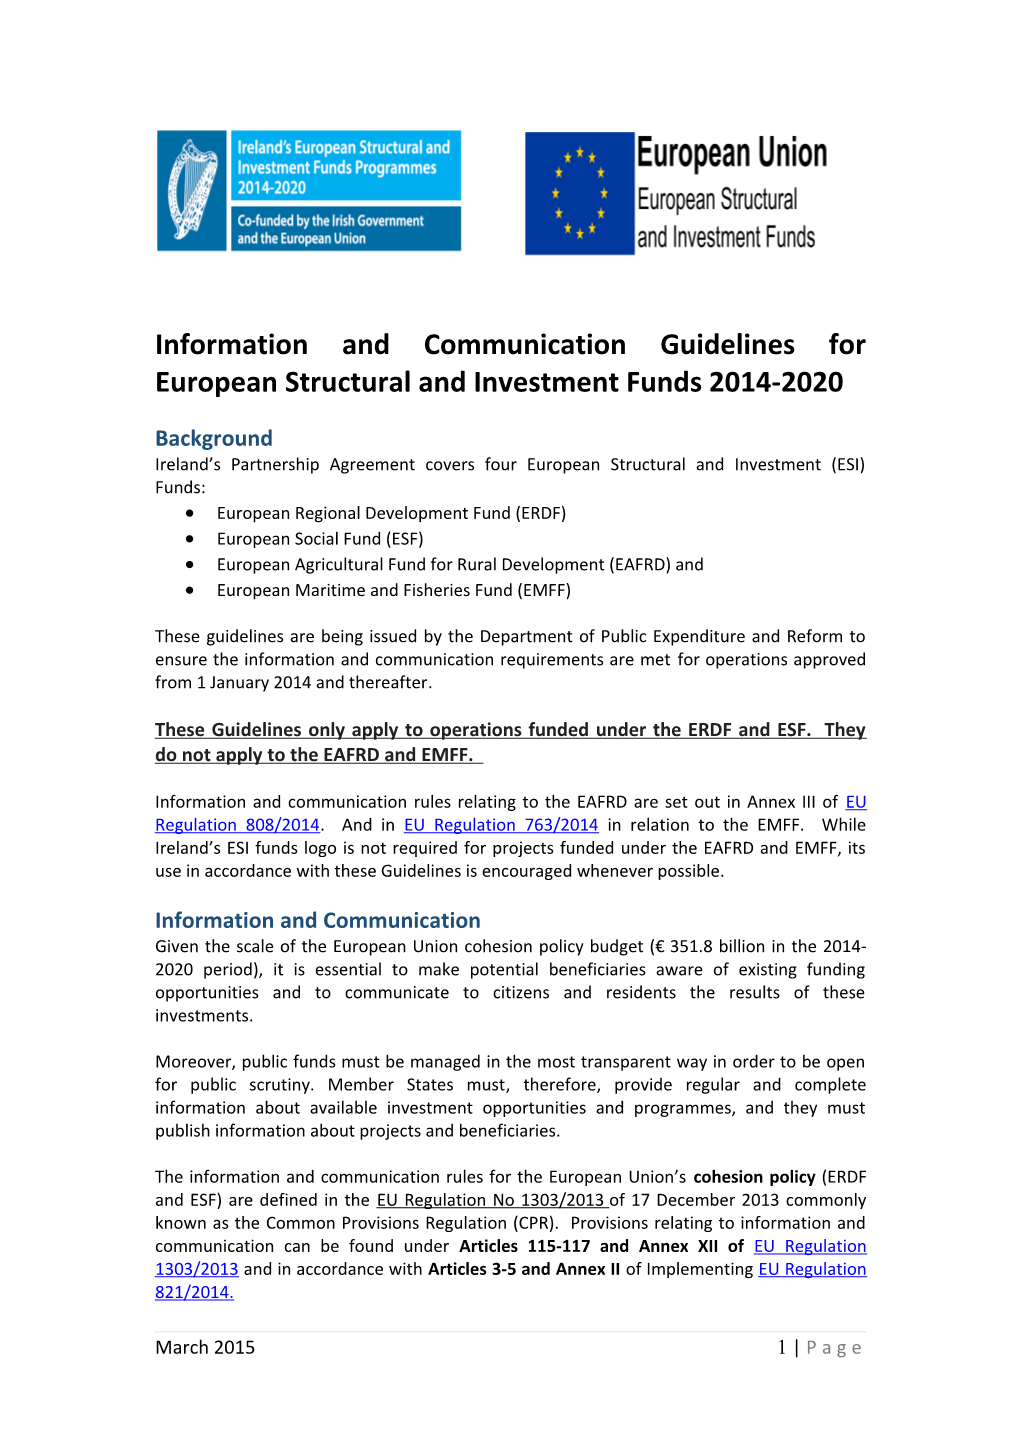 Information and Communicationguidelines for European Structural and Investment Funds 2014-2020